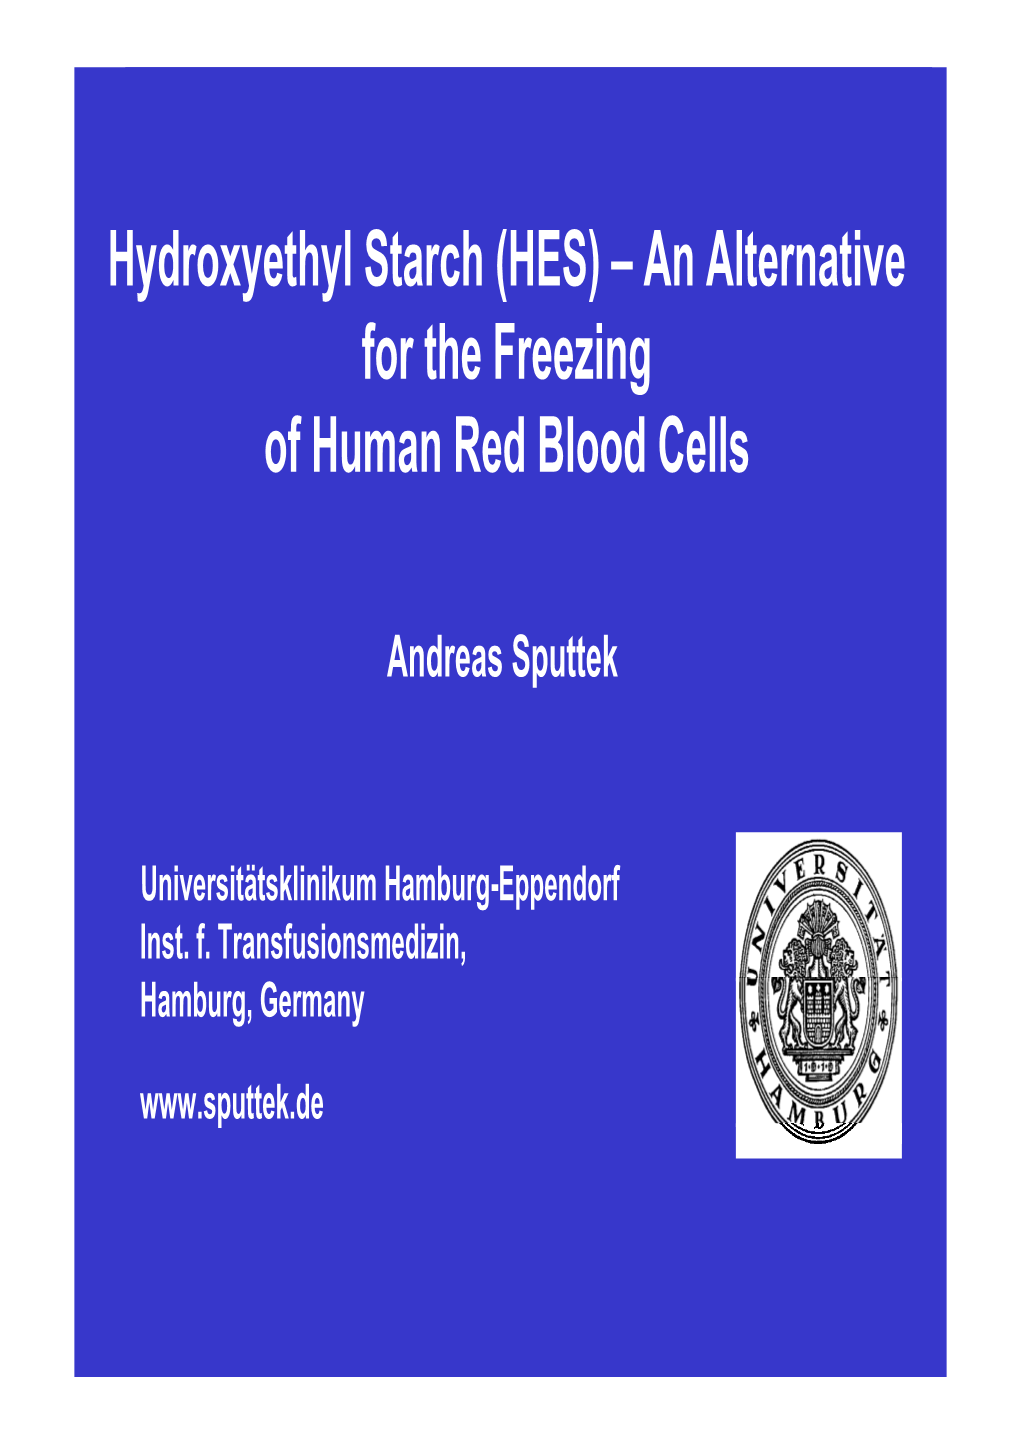 (HES) – an Alternative for the Freezing of Human Red Blood Cells